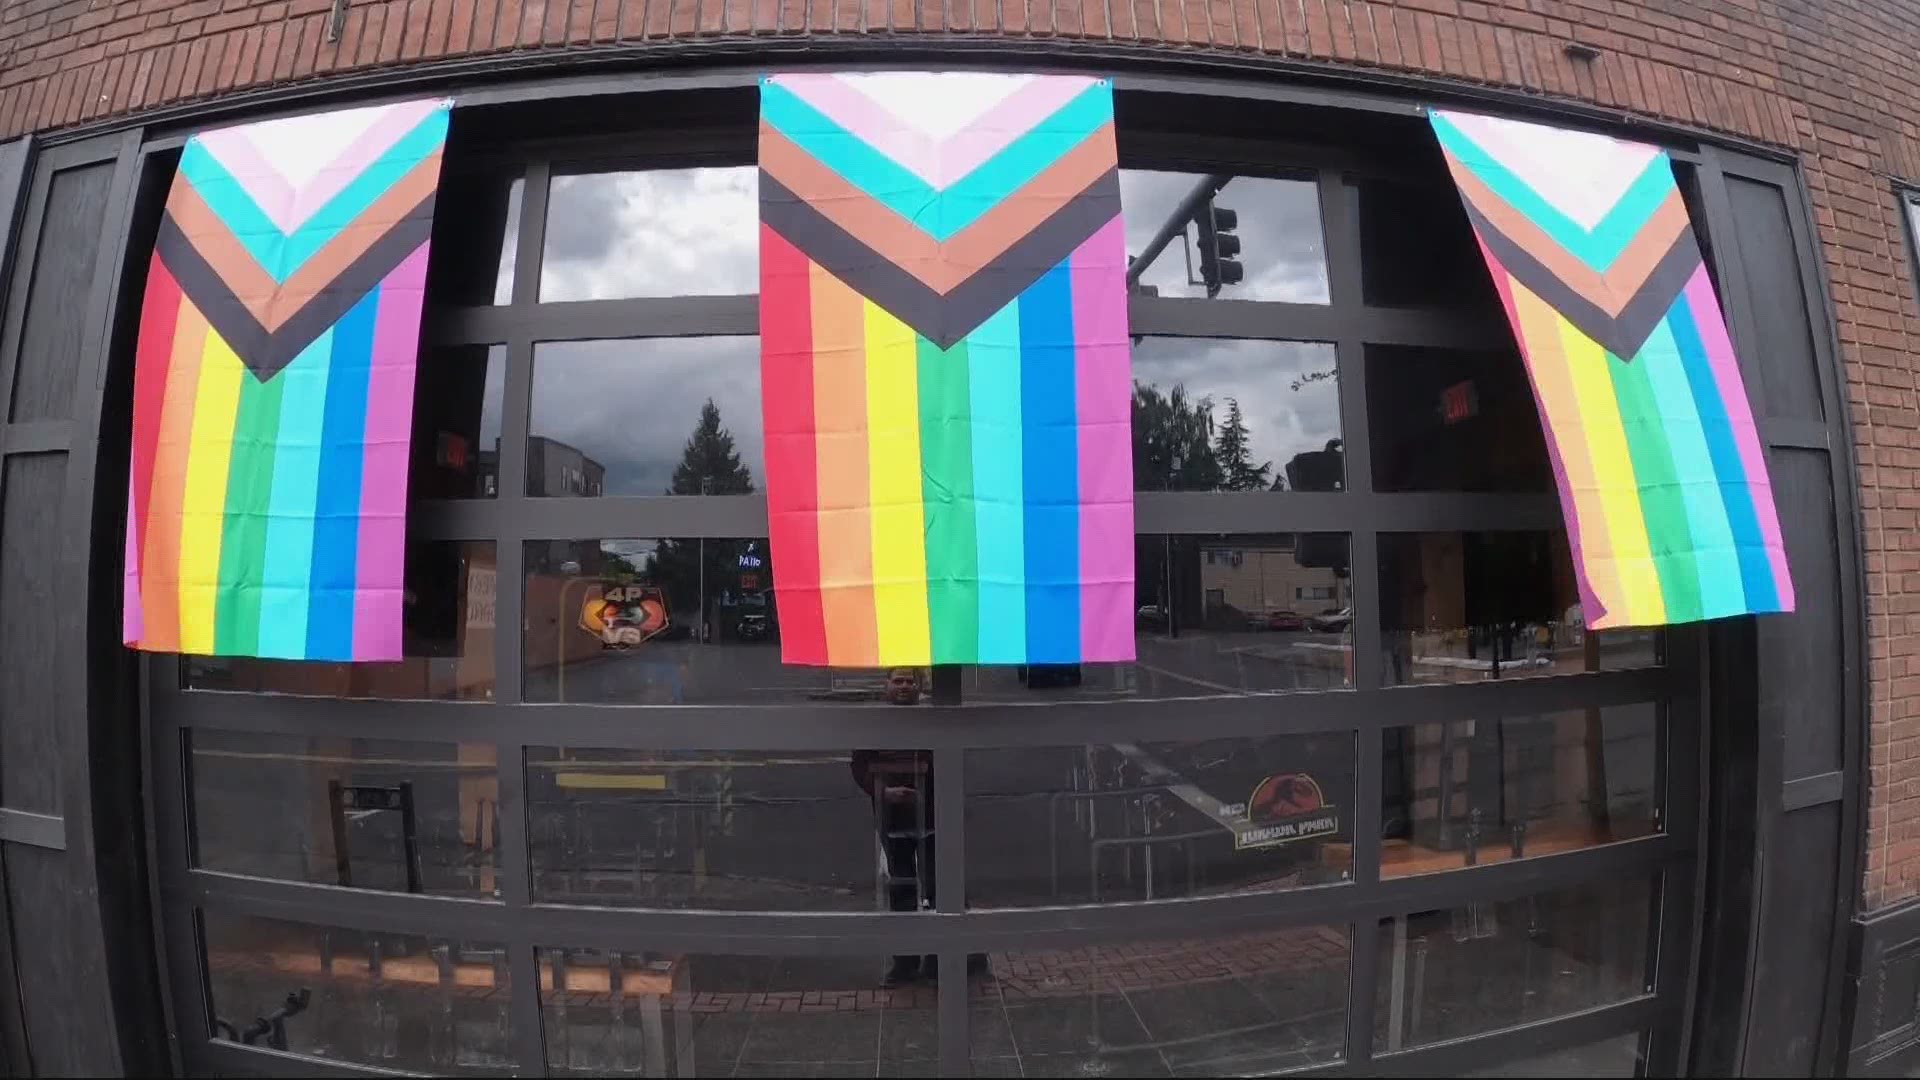 A Vancouver bar is responding to vandalism related to Pride Month. Staff arrived to find Pride banners town down. Devon Haskins reports.